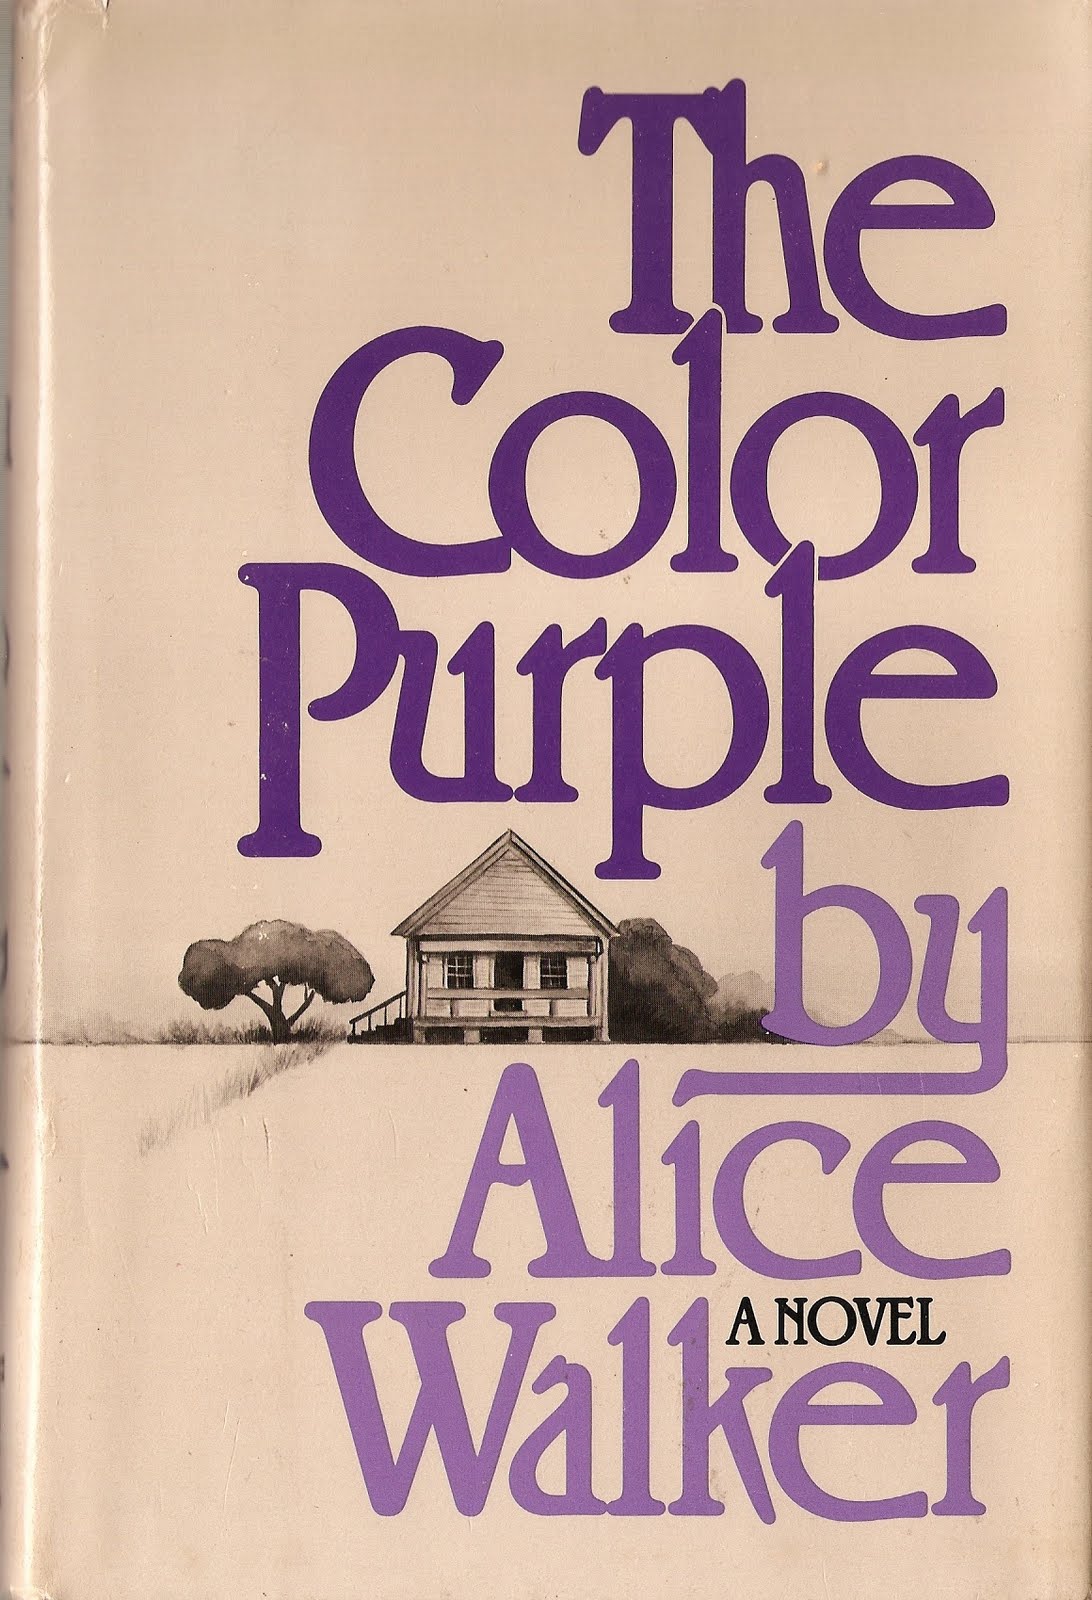 Worth Reading It The Color Purple By Alice Walker Coloring Wallpapers Download Free Images Wallpaper [coloring436.blogspot.com]